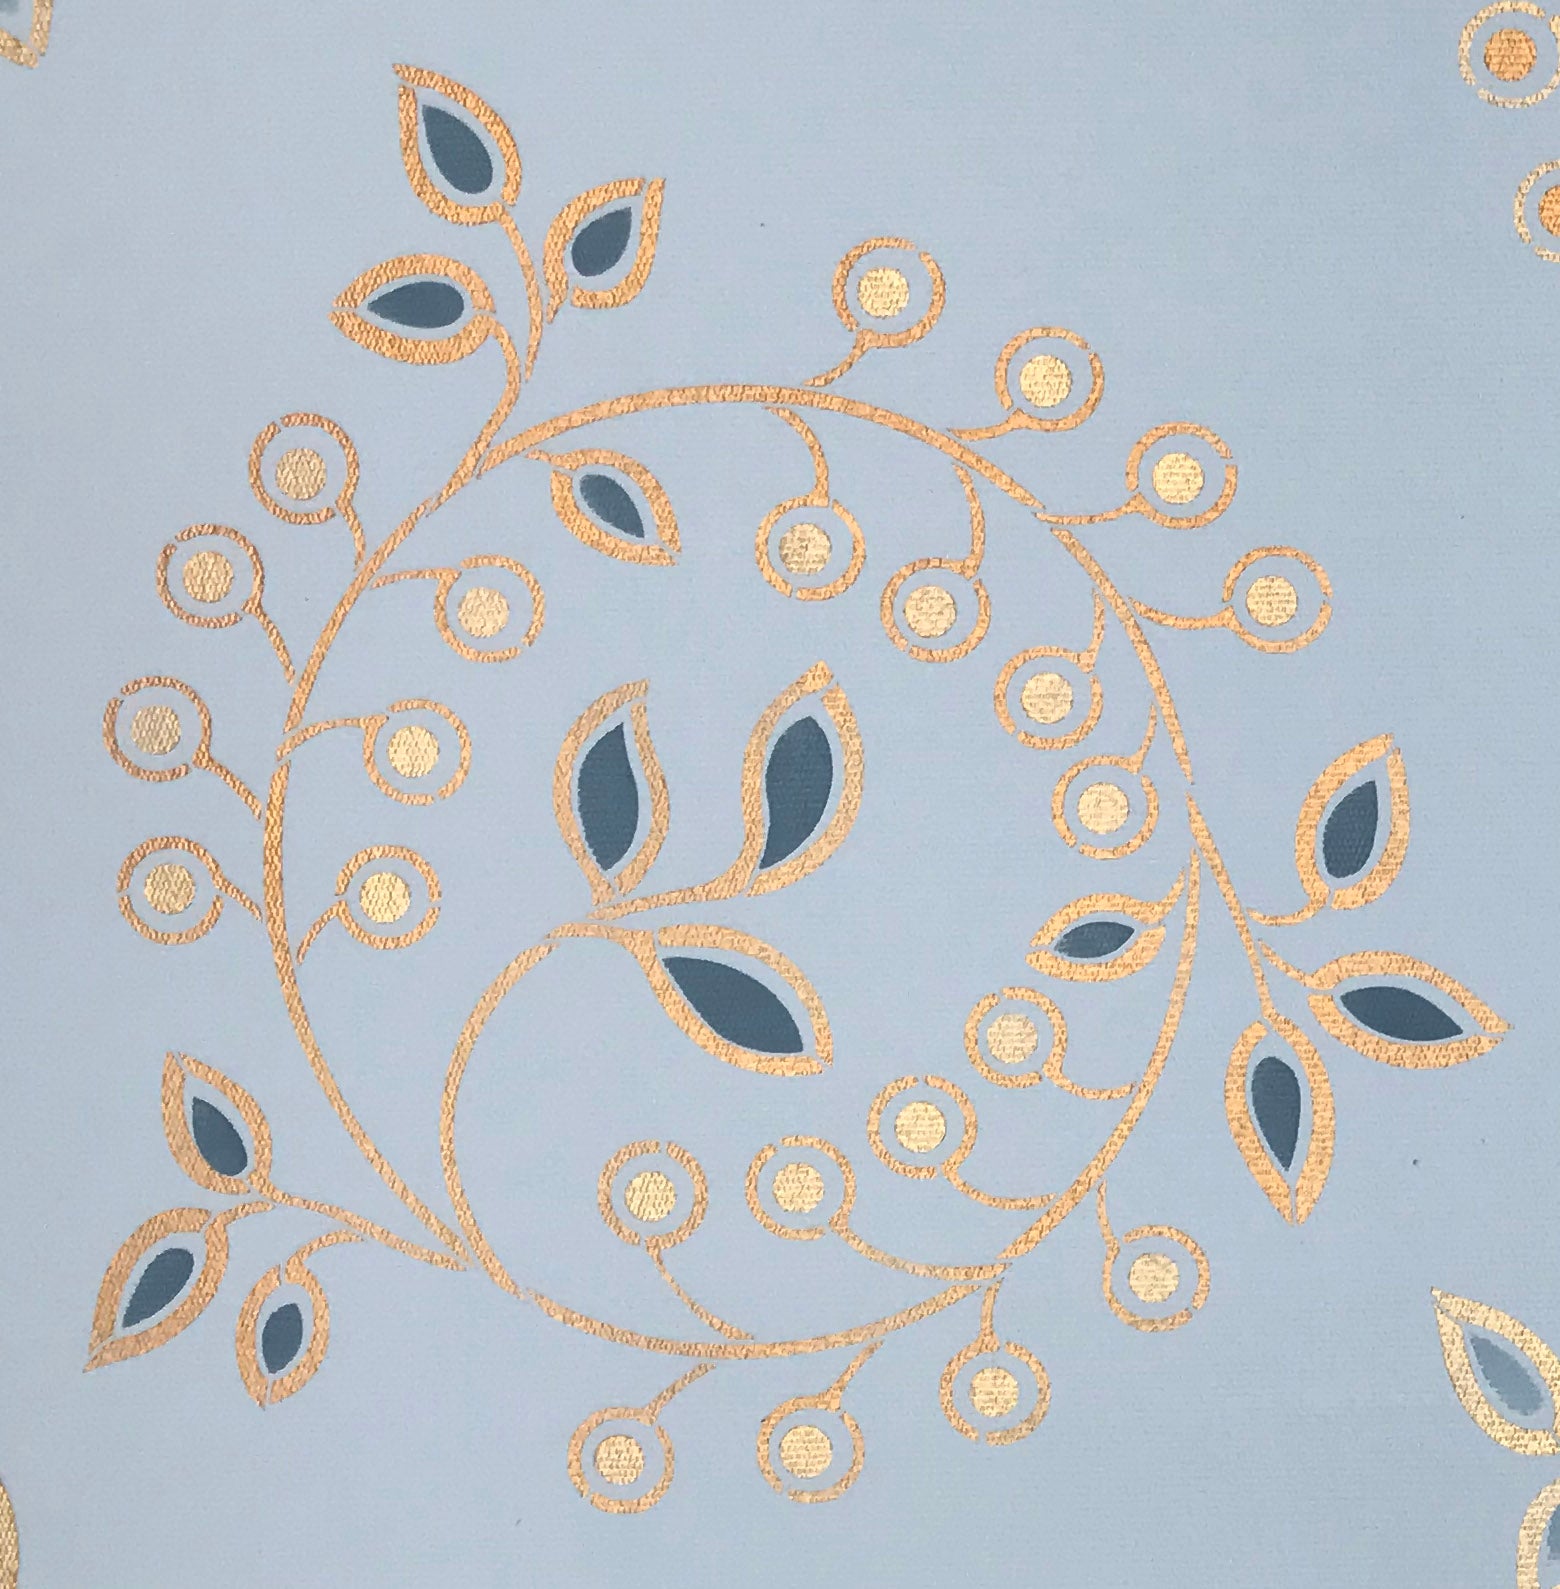 A close up of the other circular leaf and berry motifs that adorn the center of this floorcloth.